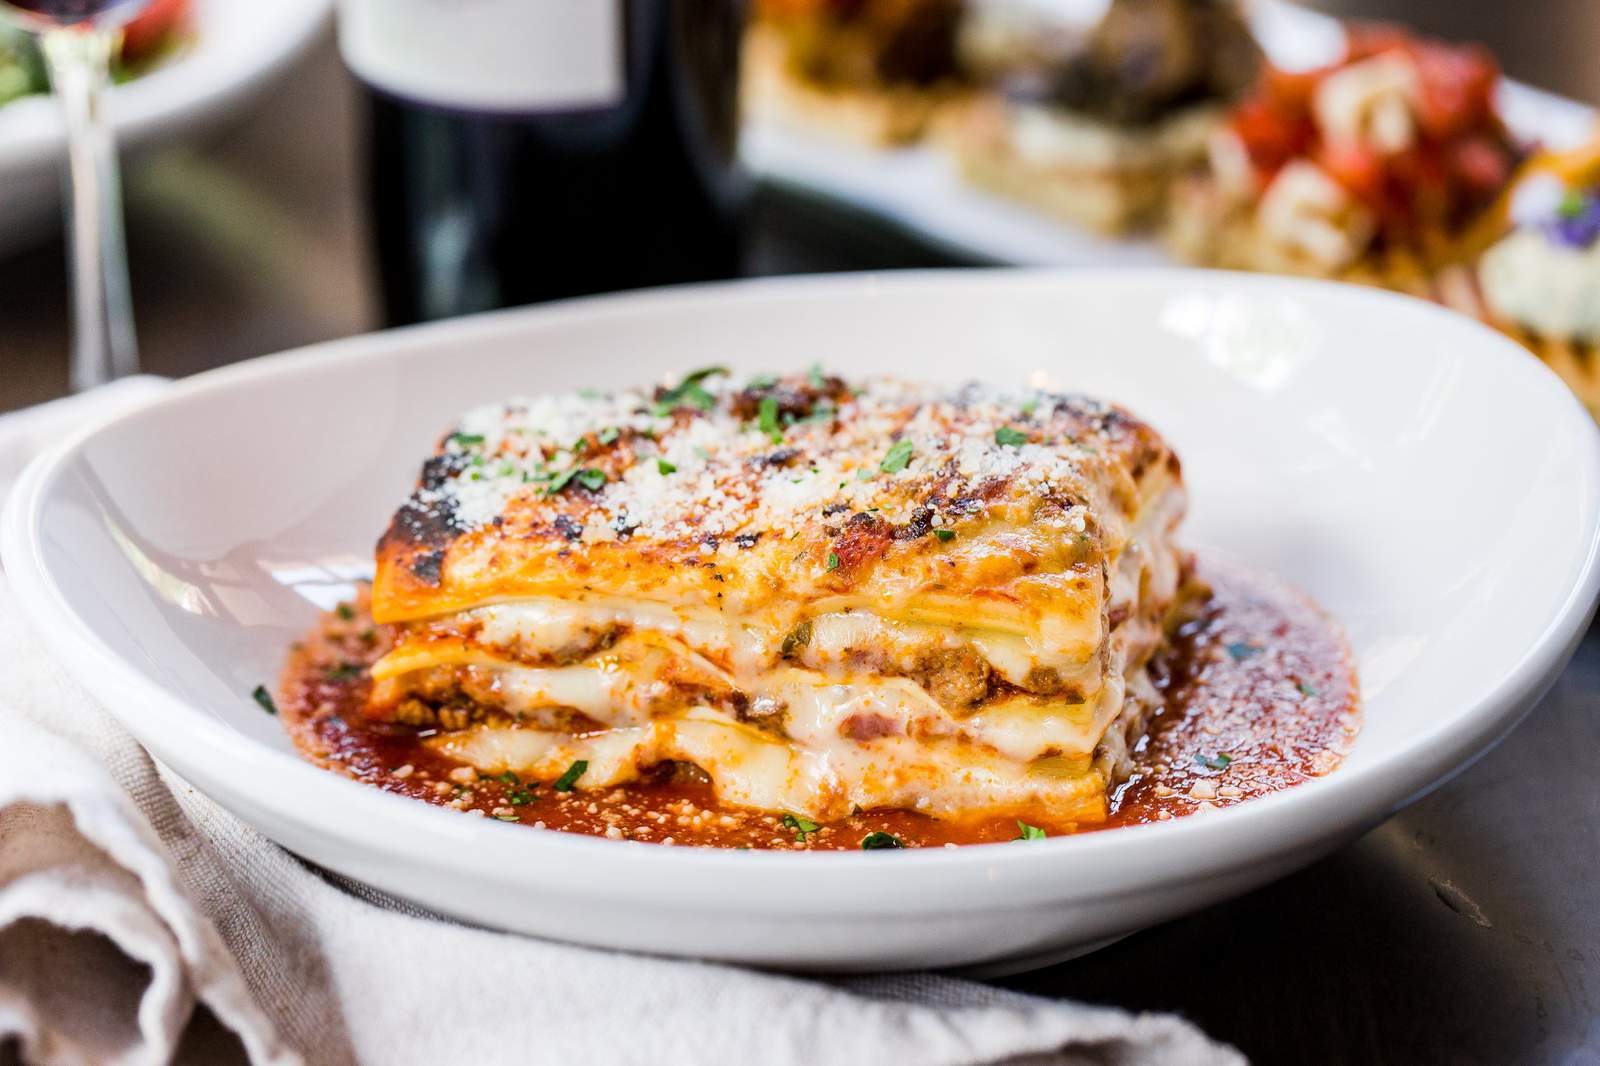 SUPPORT LOCAL: 5 Italian restaurants in The Woodlands you need to know about